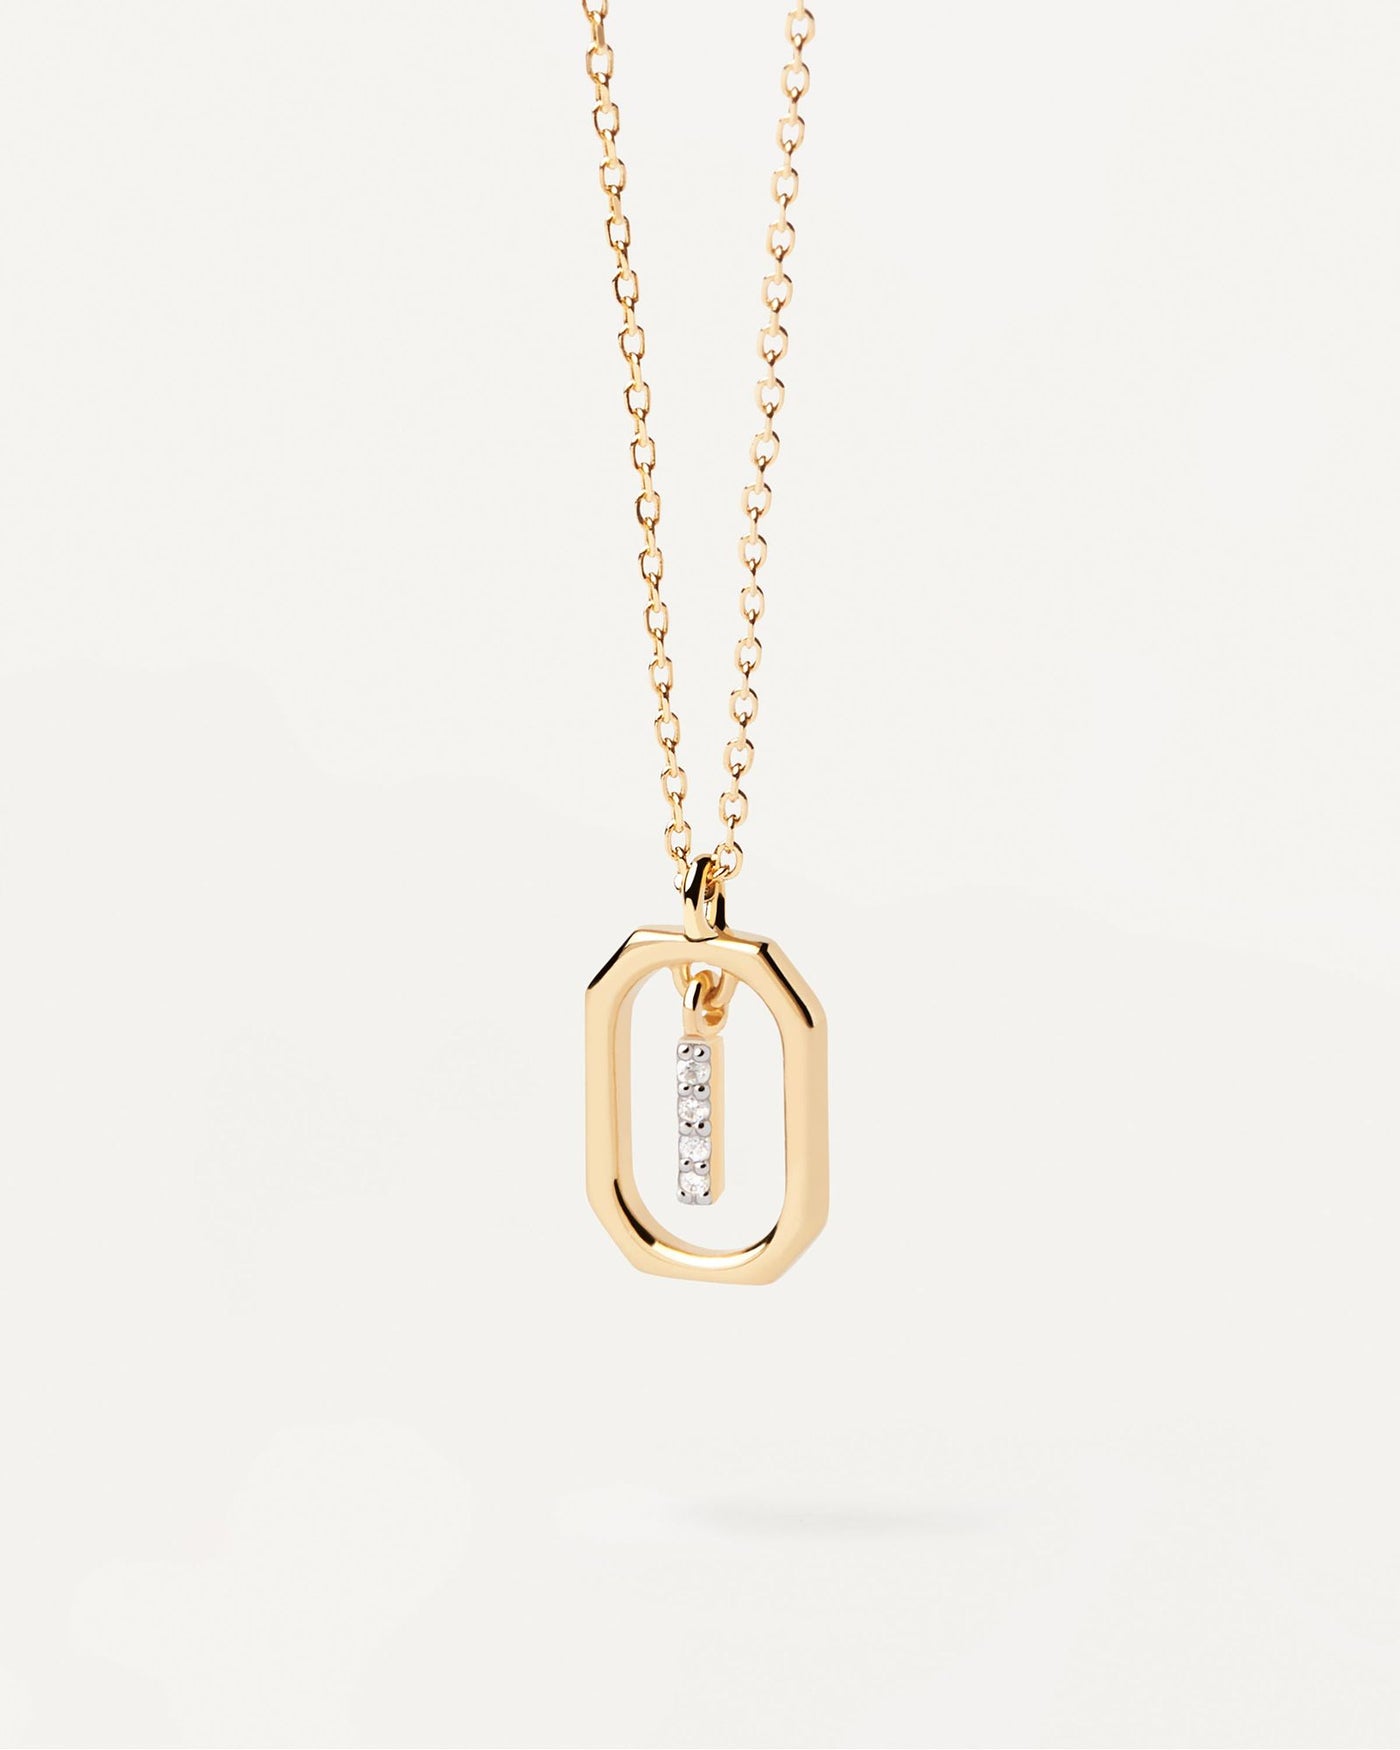 2024 Selection | Mini Letter I Necklace. Small initial I necklace in zirconia inside gold-plated silver octagonal pendant. Get the latest arrival from PDPAOLA. Place your order safely and get this Best Seller. Free Shipping.